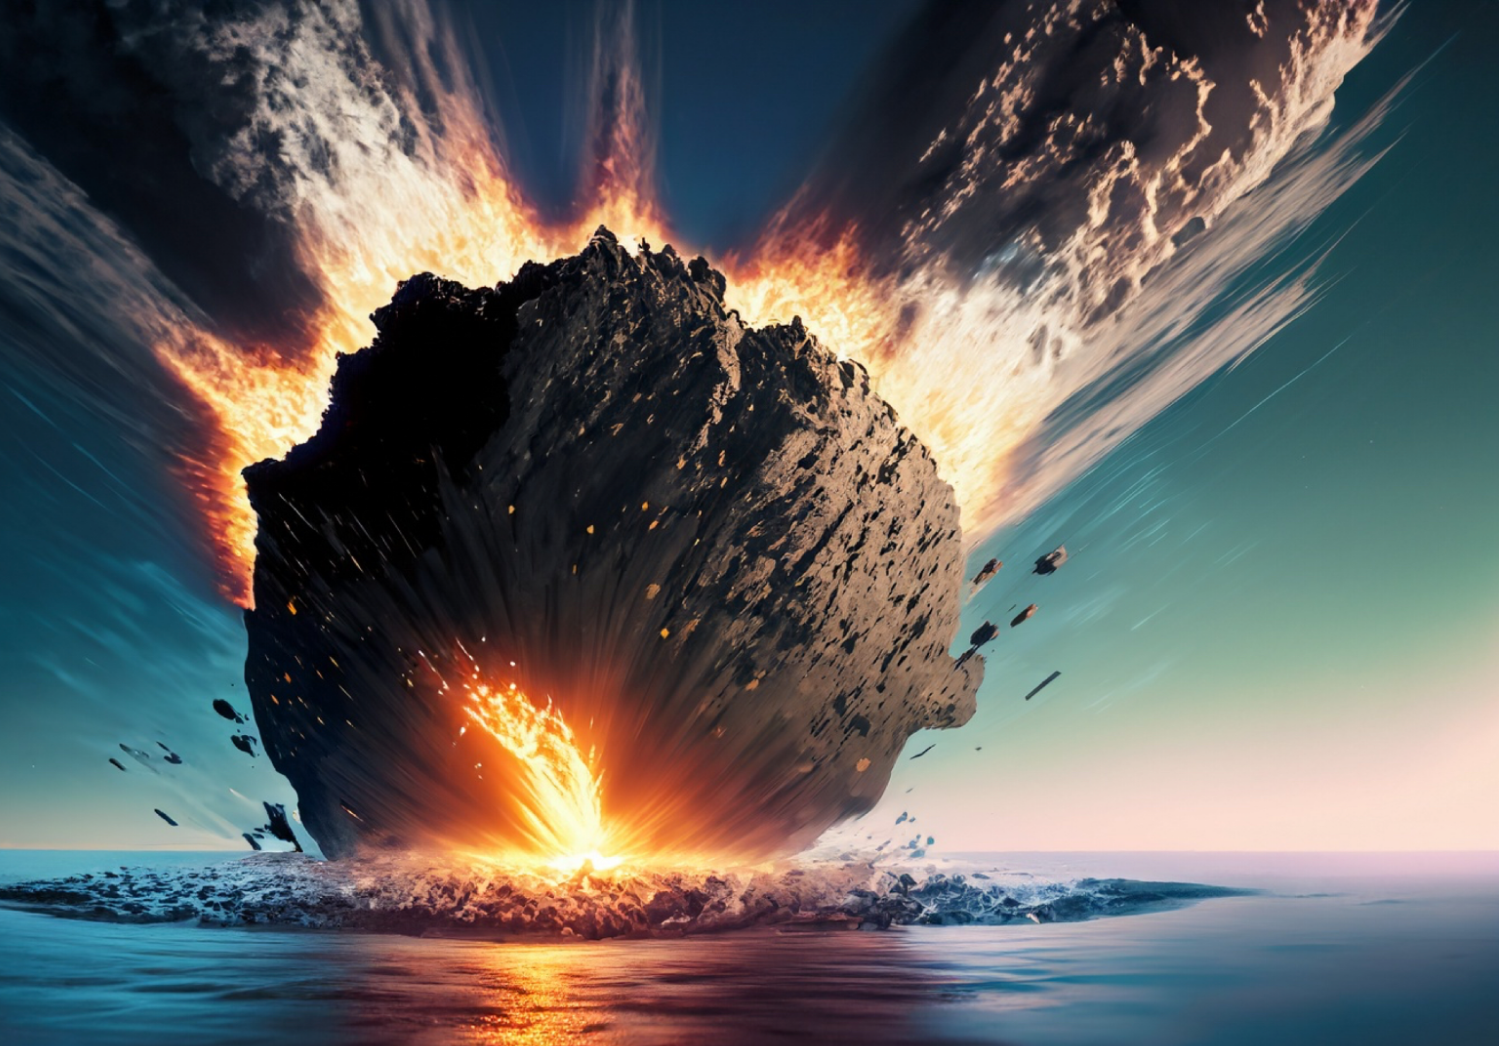 AI generated image of a large, round meteor crashing into the ocean. Small red icon of Adobe firefly in the bottom left corner